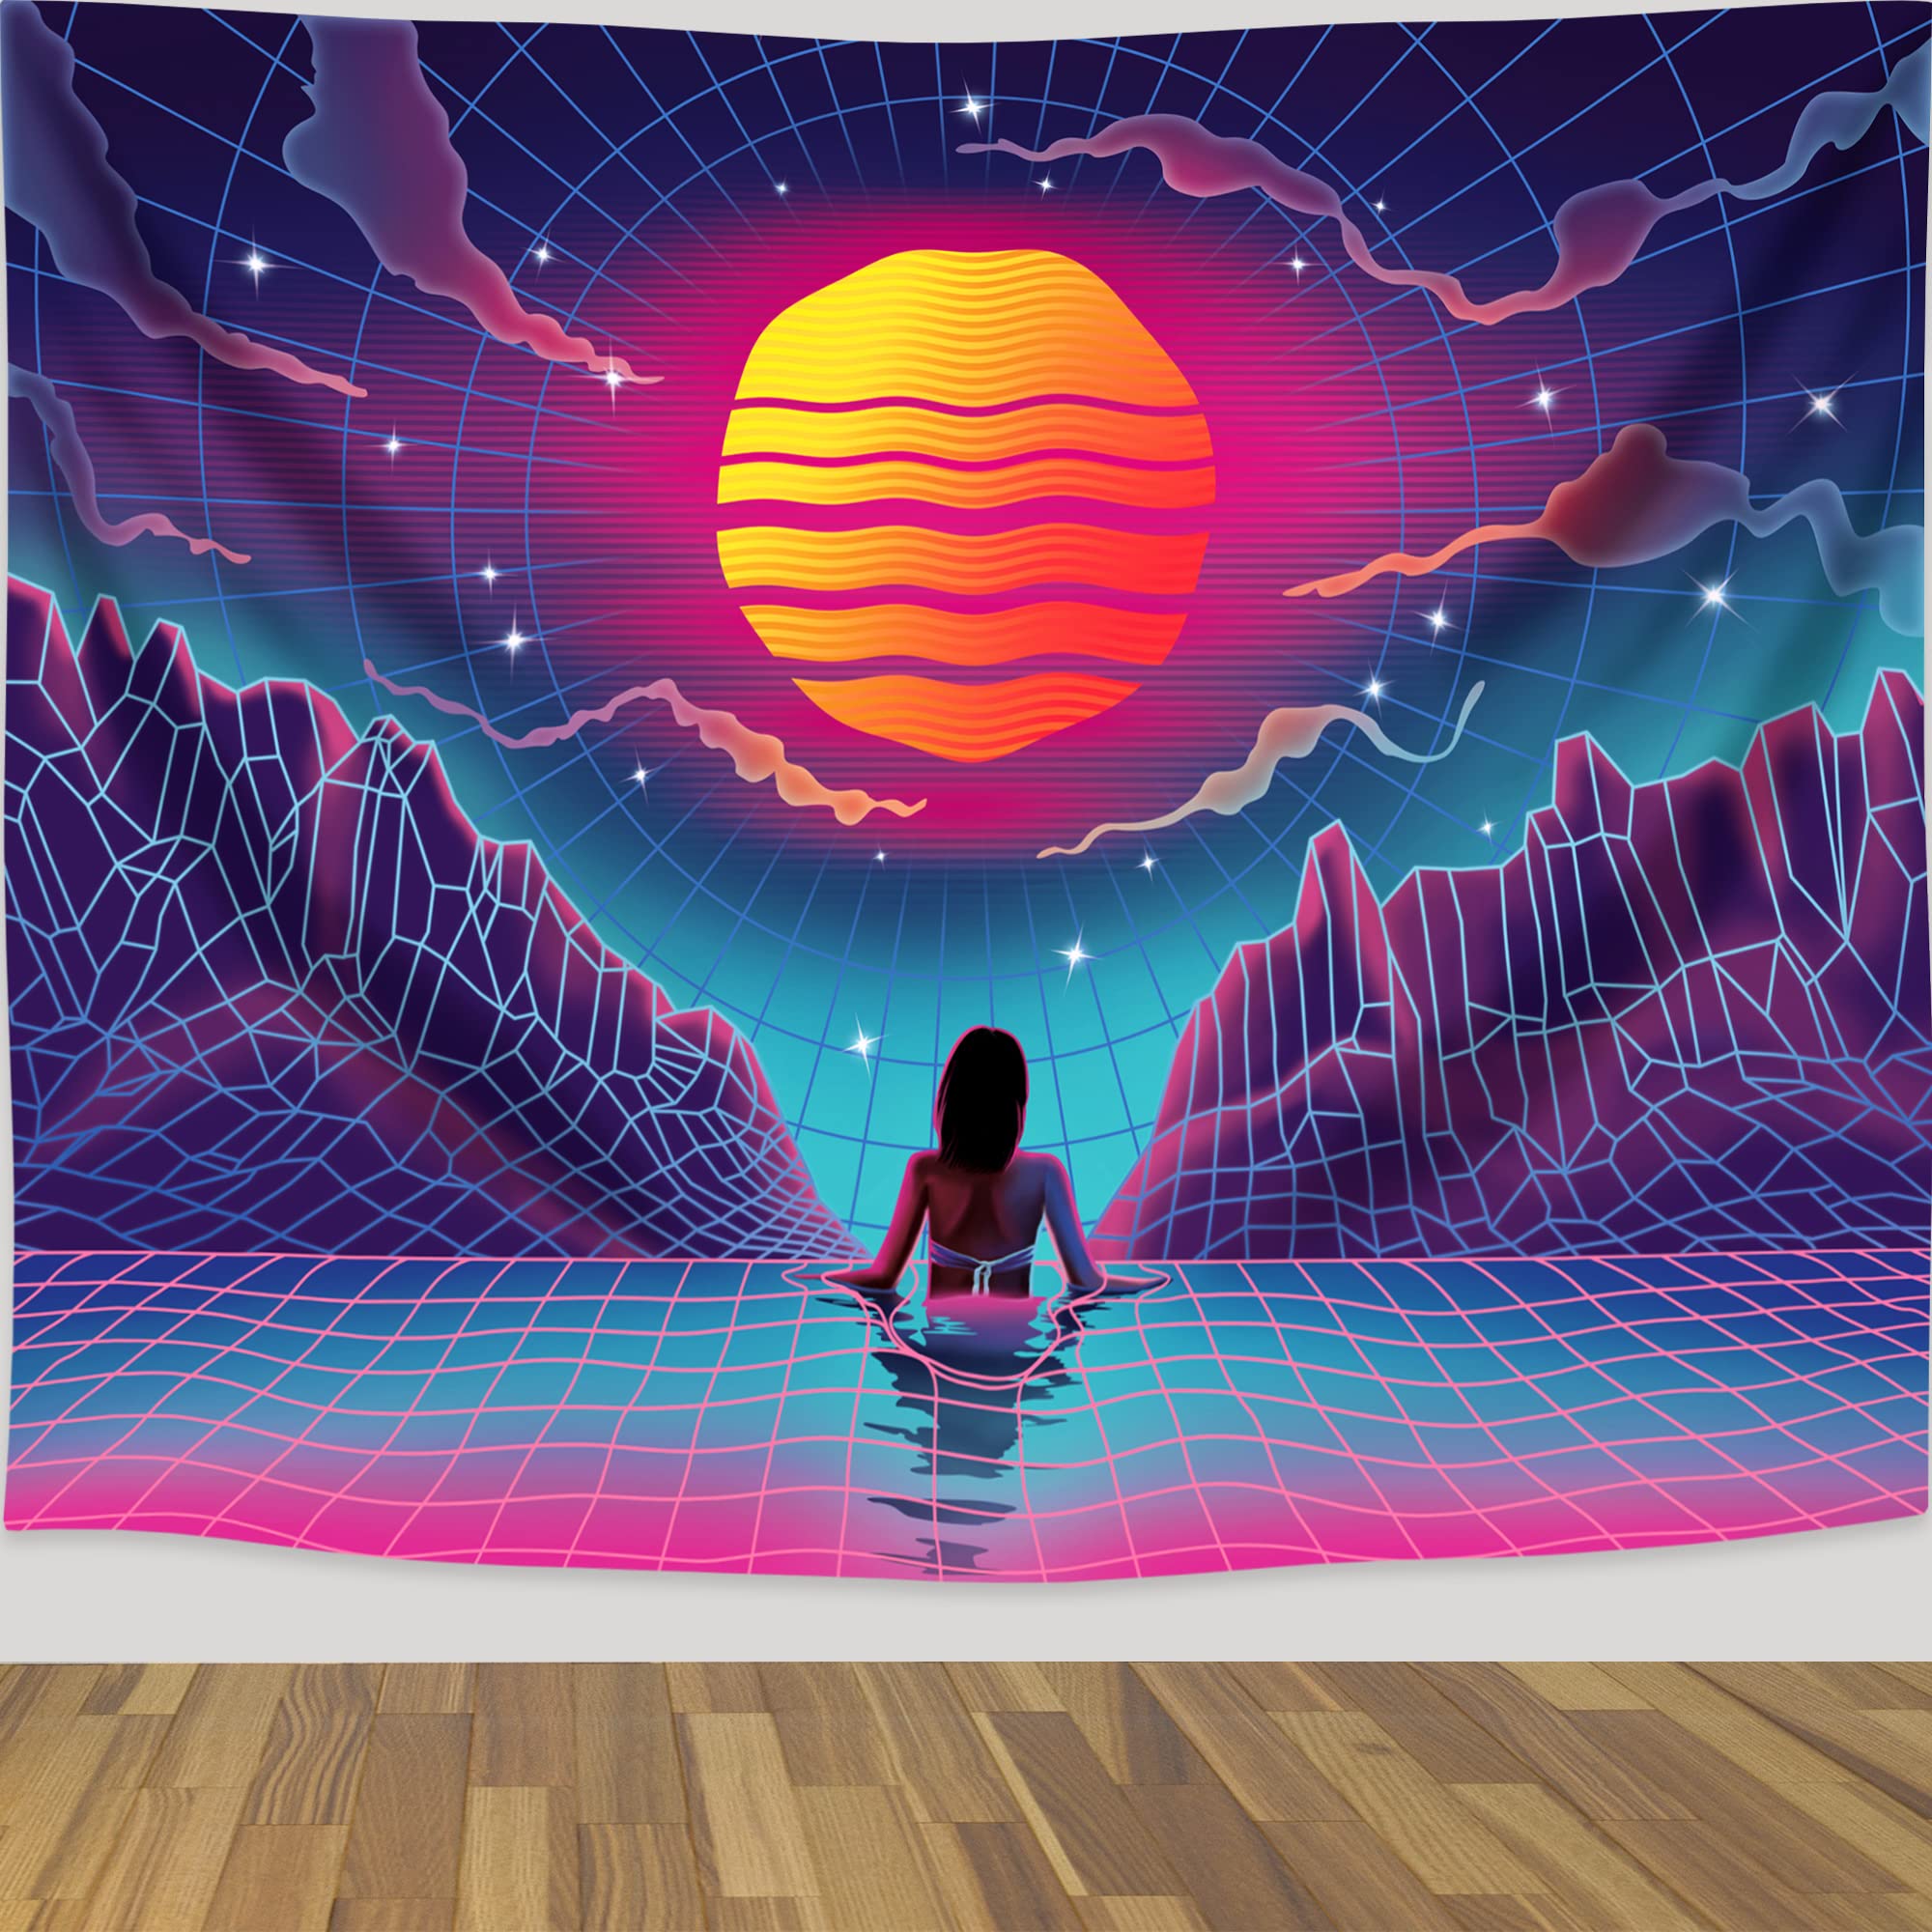 Generic Trippy Aesthetic Tapestry Retro Abstract Synthwave Tapestry Pretty Pink Sunset Vaporwave Tapestry for Bedroom Living